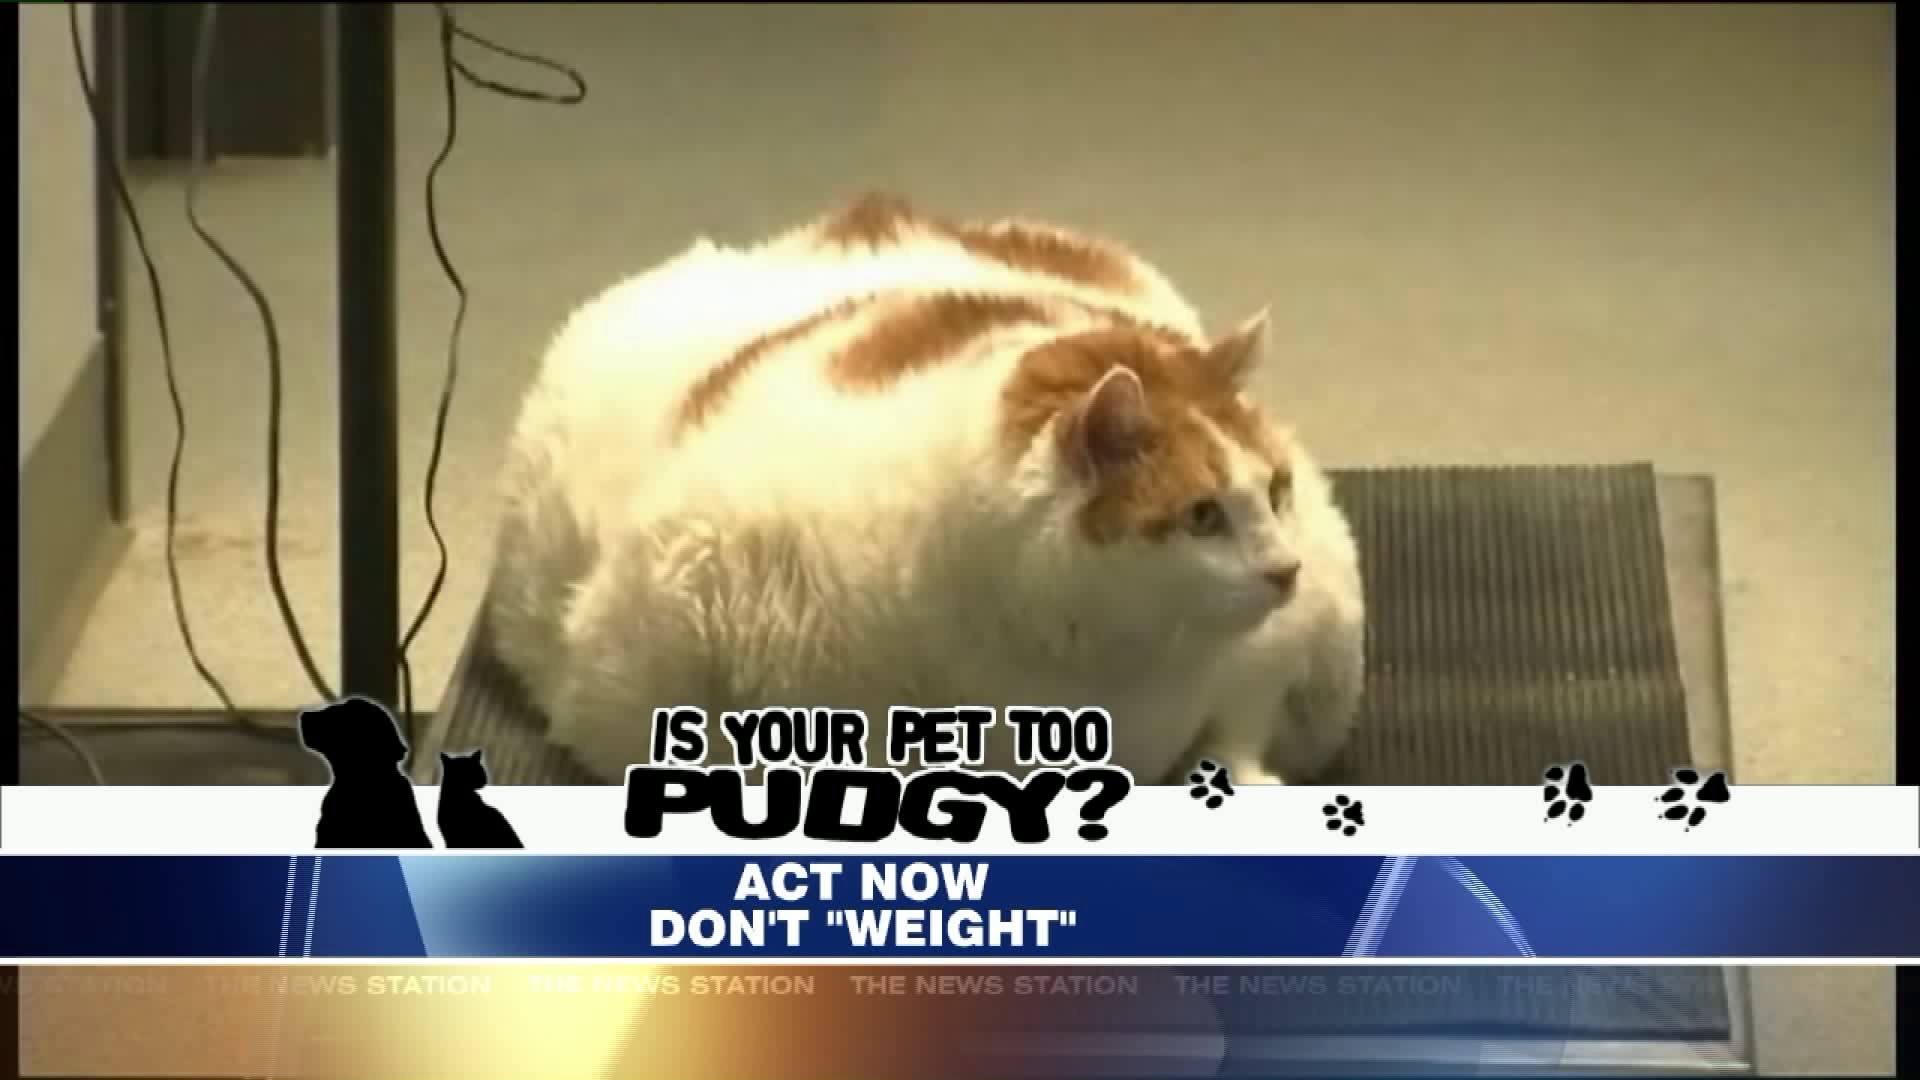 Is Your Pet Too Pudgy?